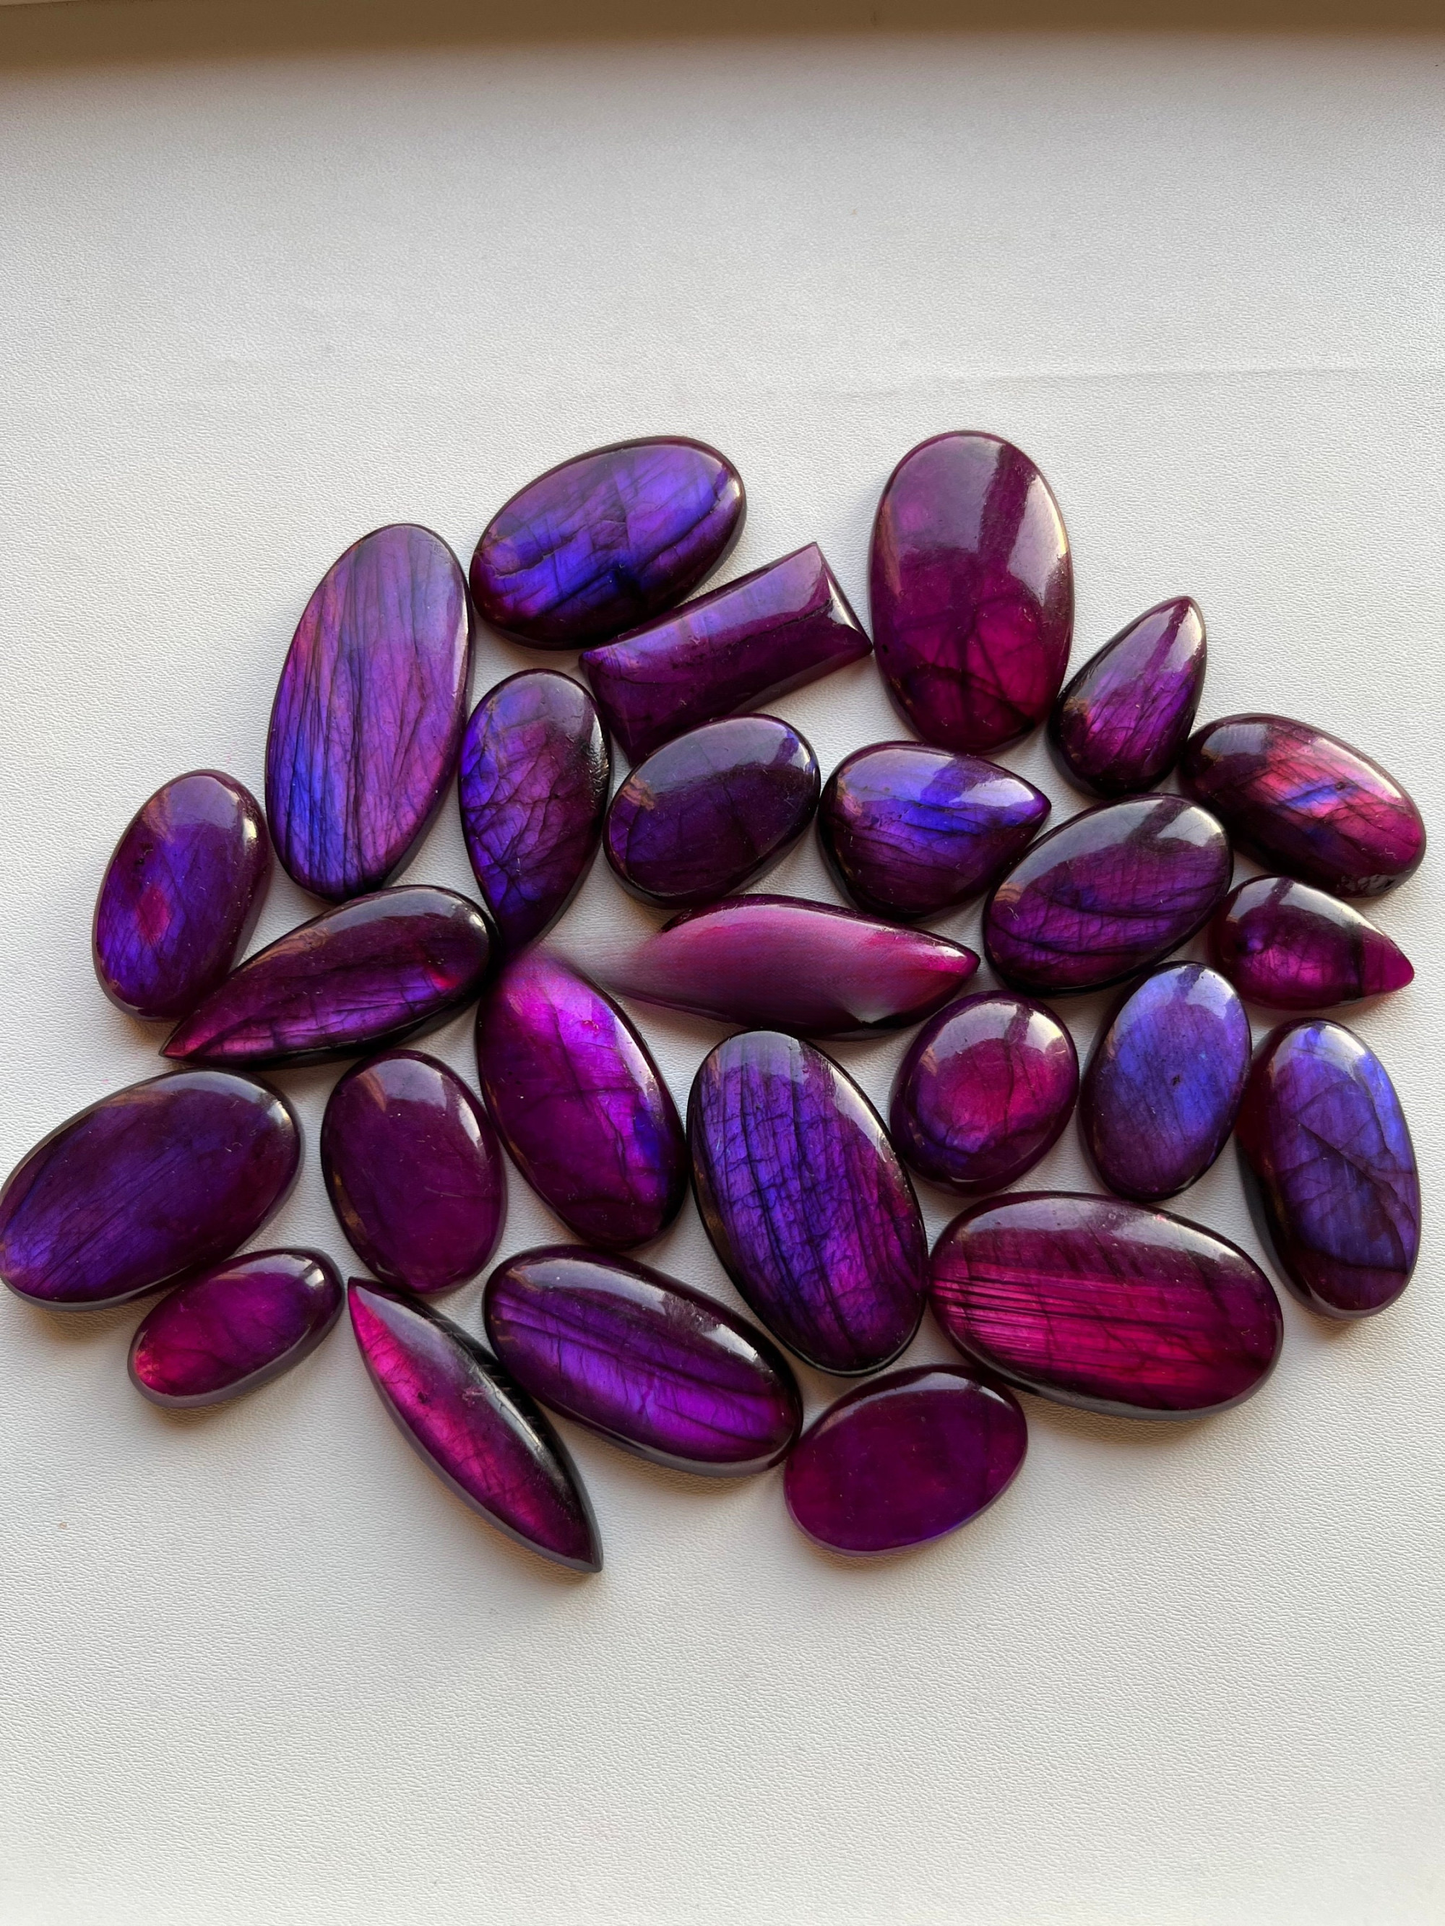 Purple Labradorite Cabochon Wholesale Lot By Weight Used For Jewelry Making (Natural Stone-Coated))